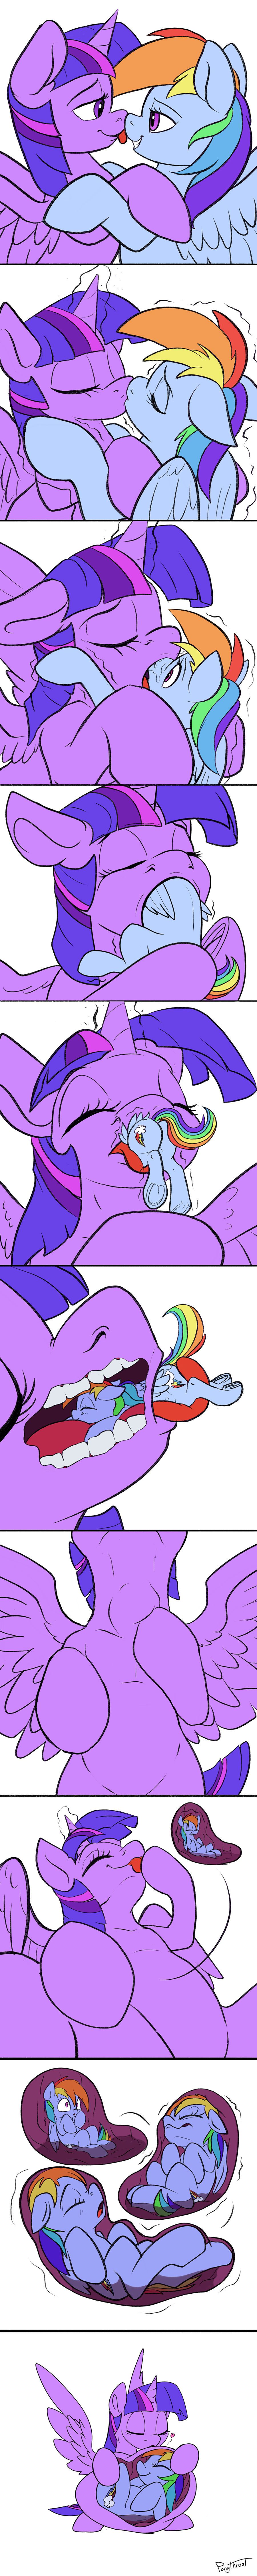 Twilight Sparkle Vore Collection ongoing... 35